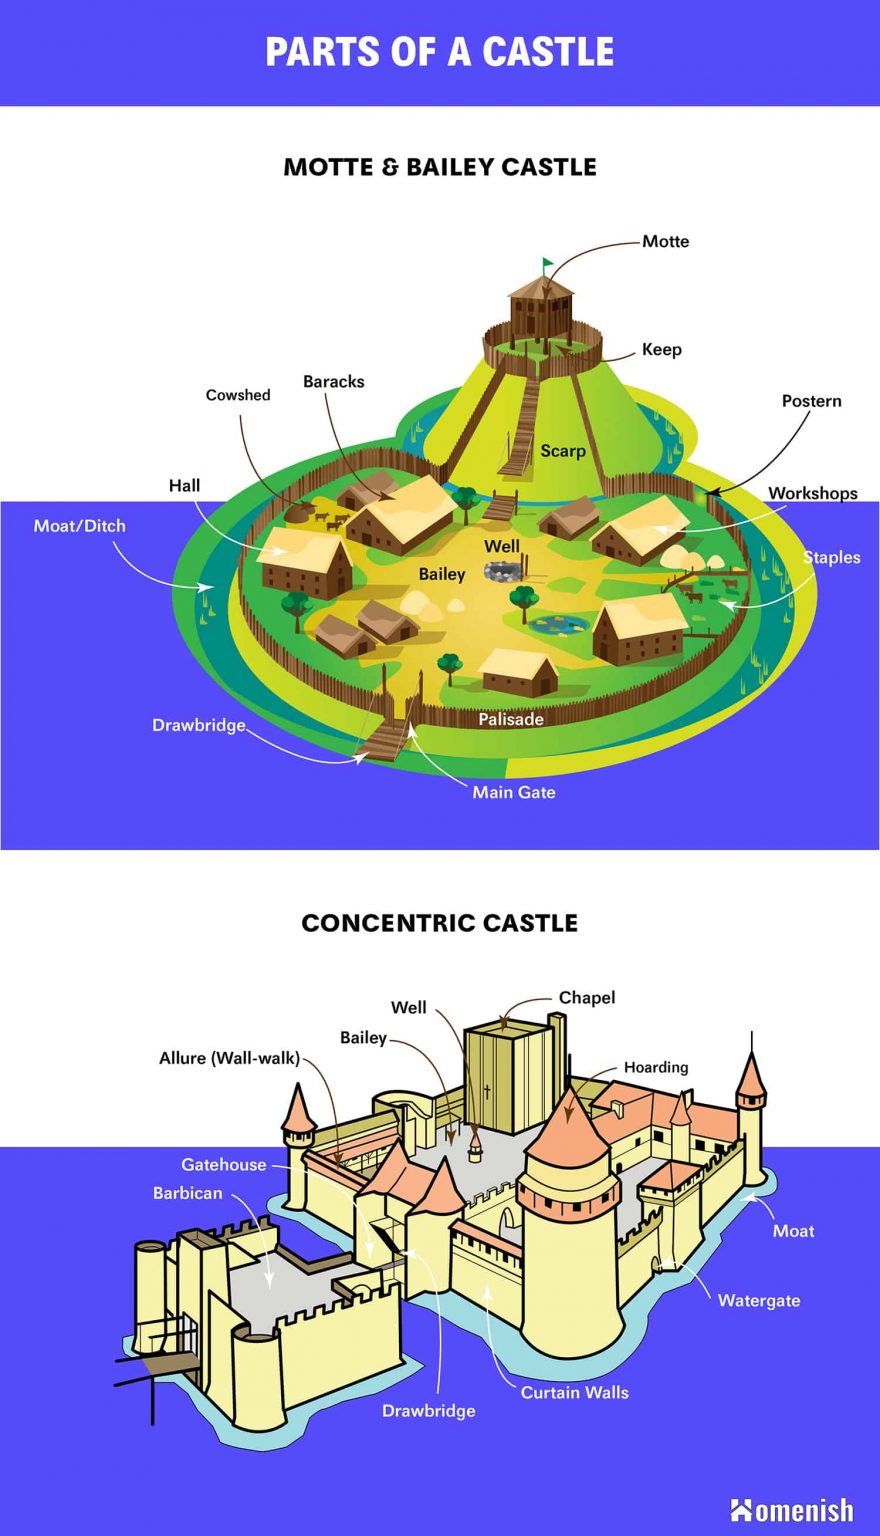 Parts of a Castle (Diagrams For Concentric and Motte & Bailey Castle